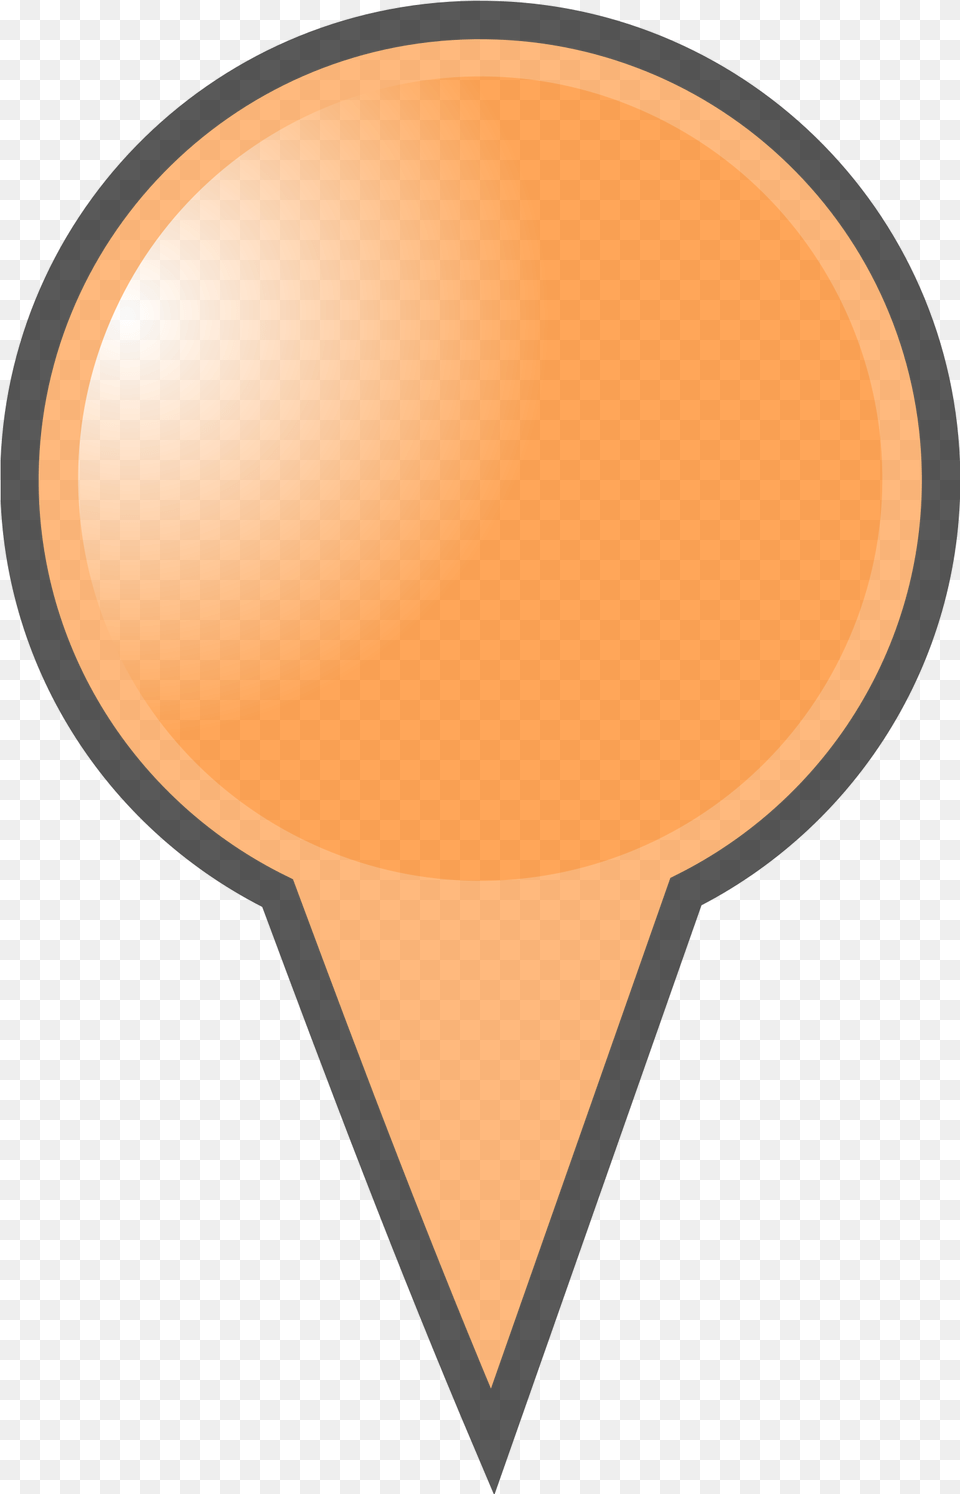 Google Map Maker Pen Computer Icons Clip Icon, Balloon Free Transparent Png